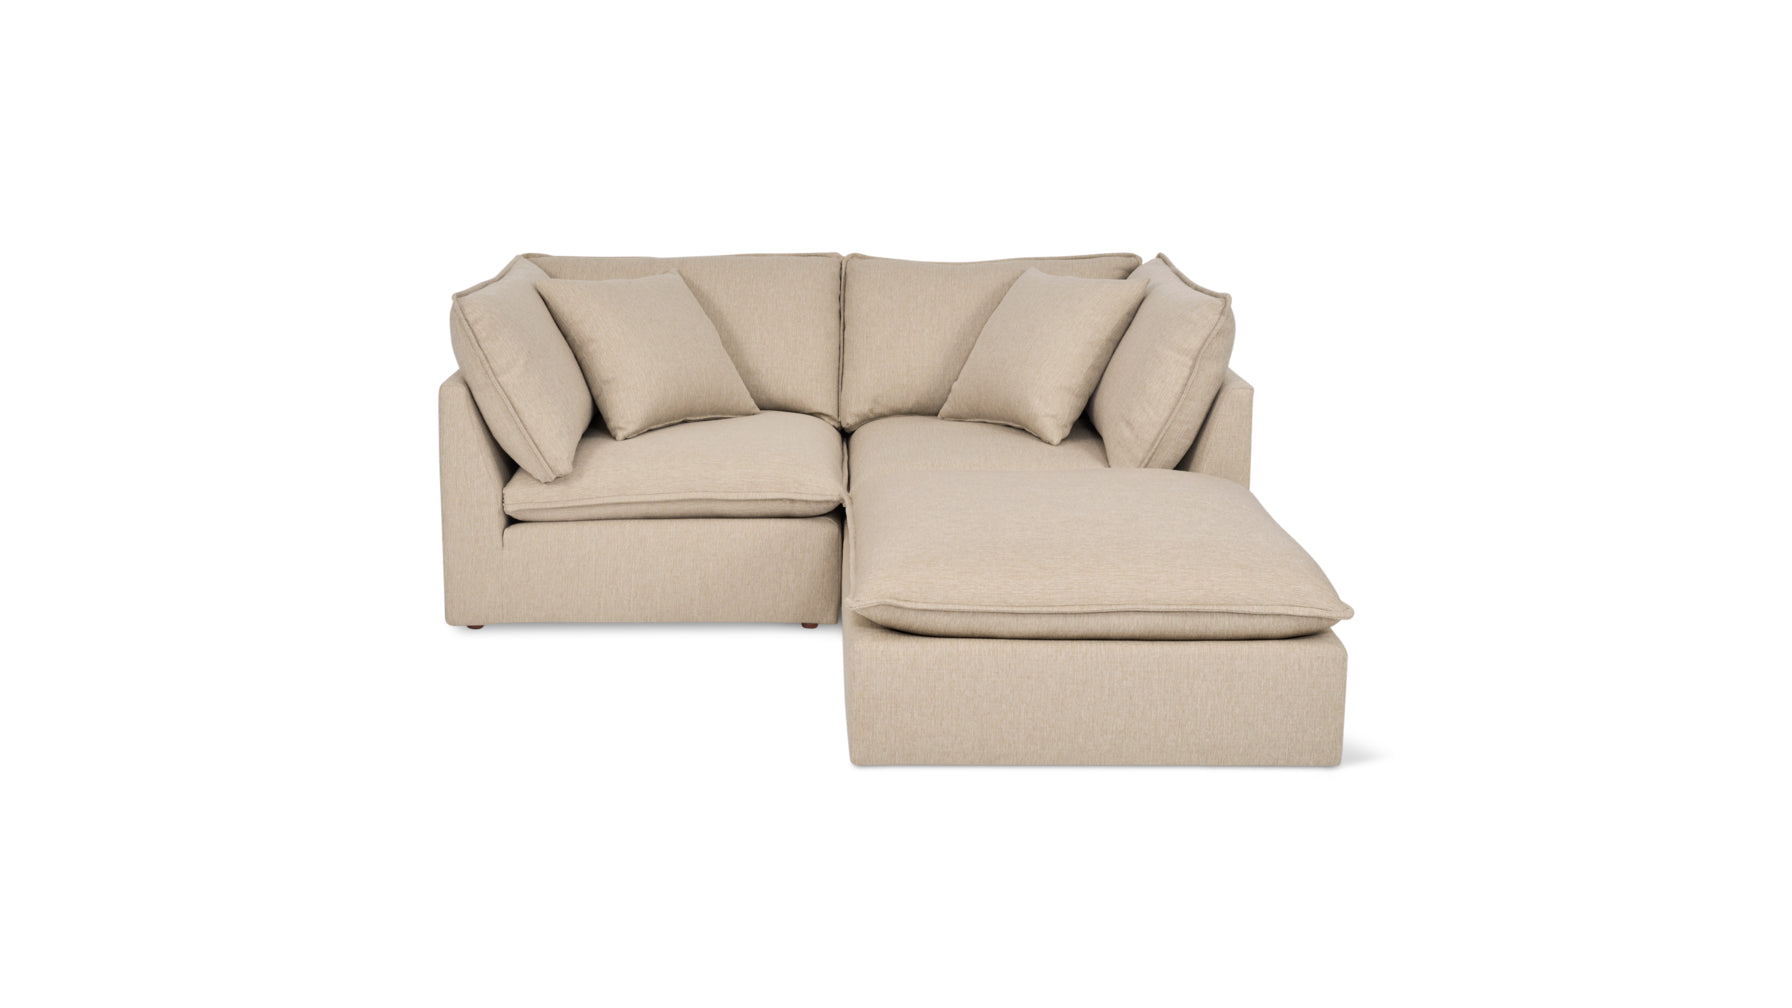 Chill Time 3-Piece Modular Sectional, Biscuit - Image 1